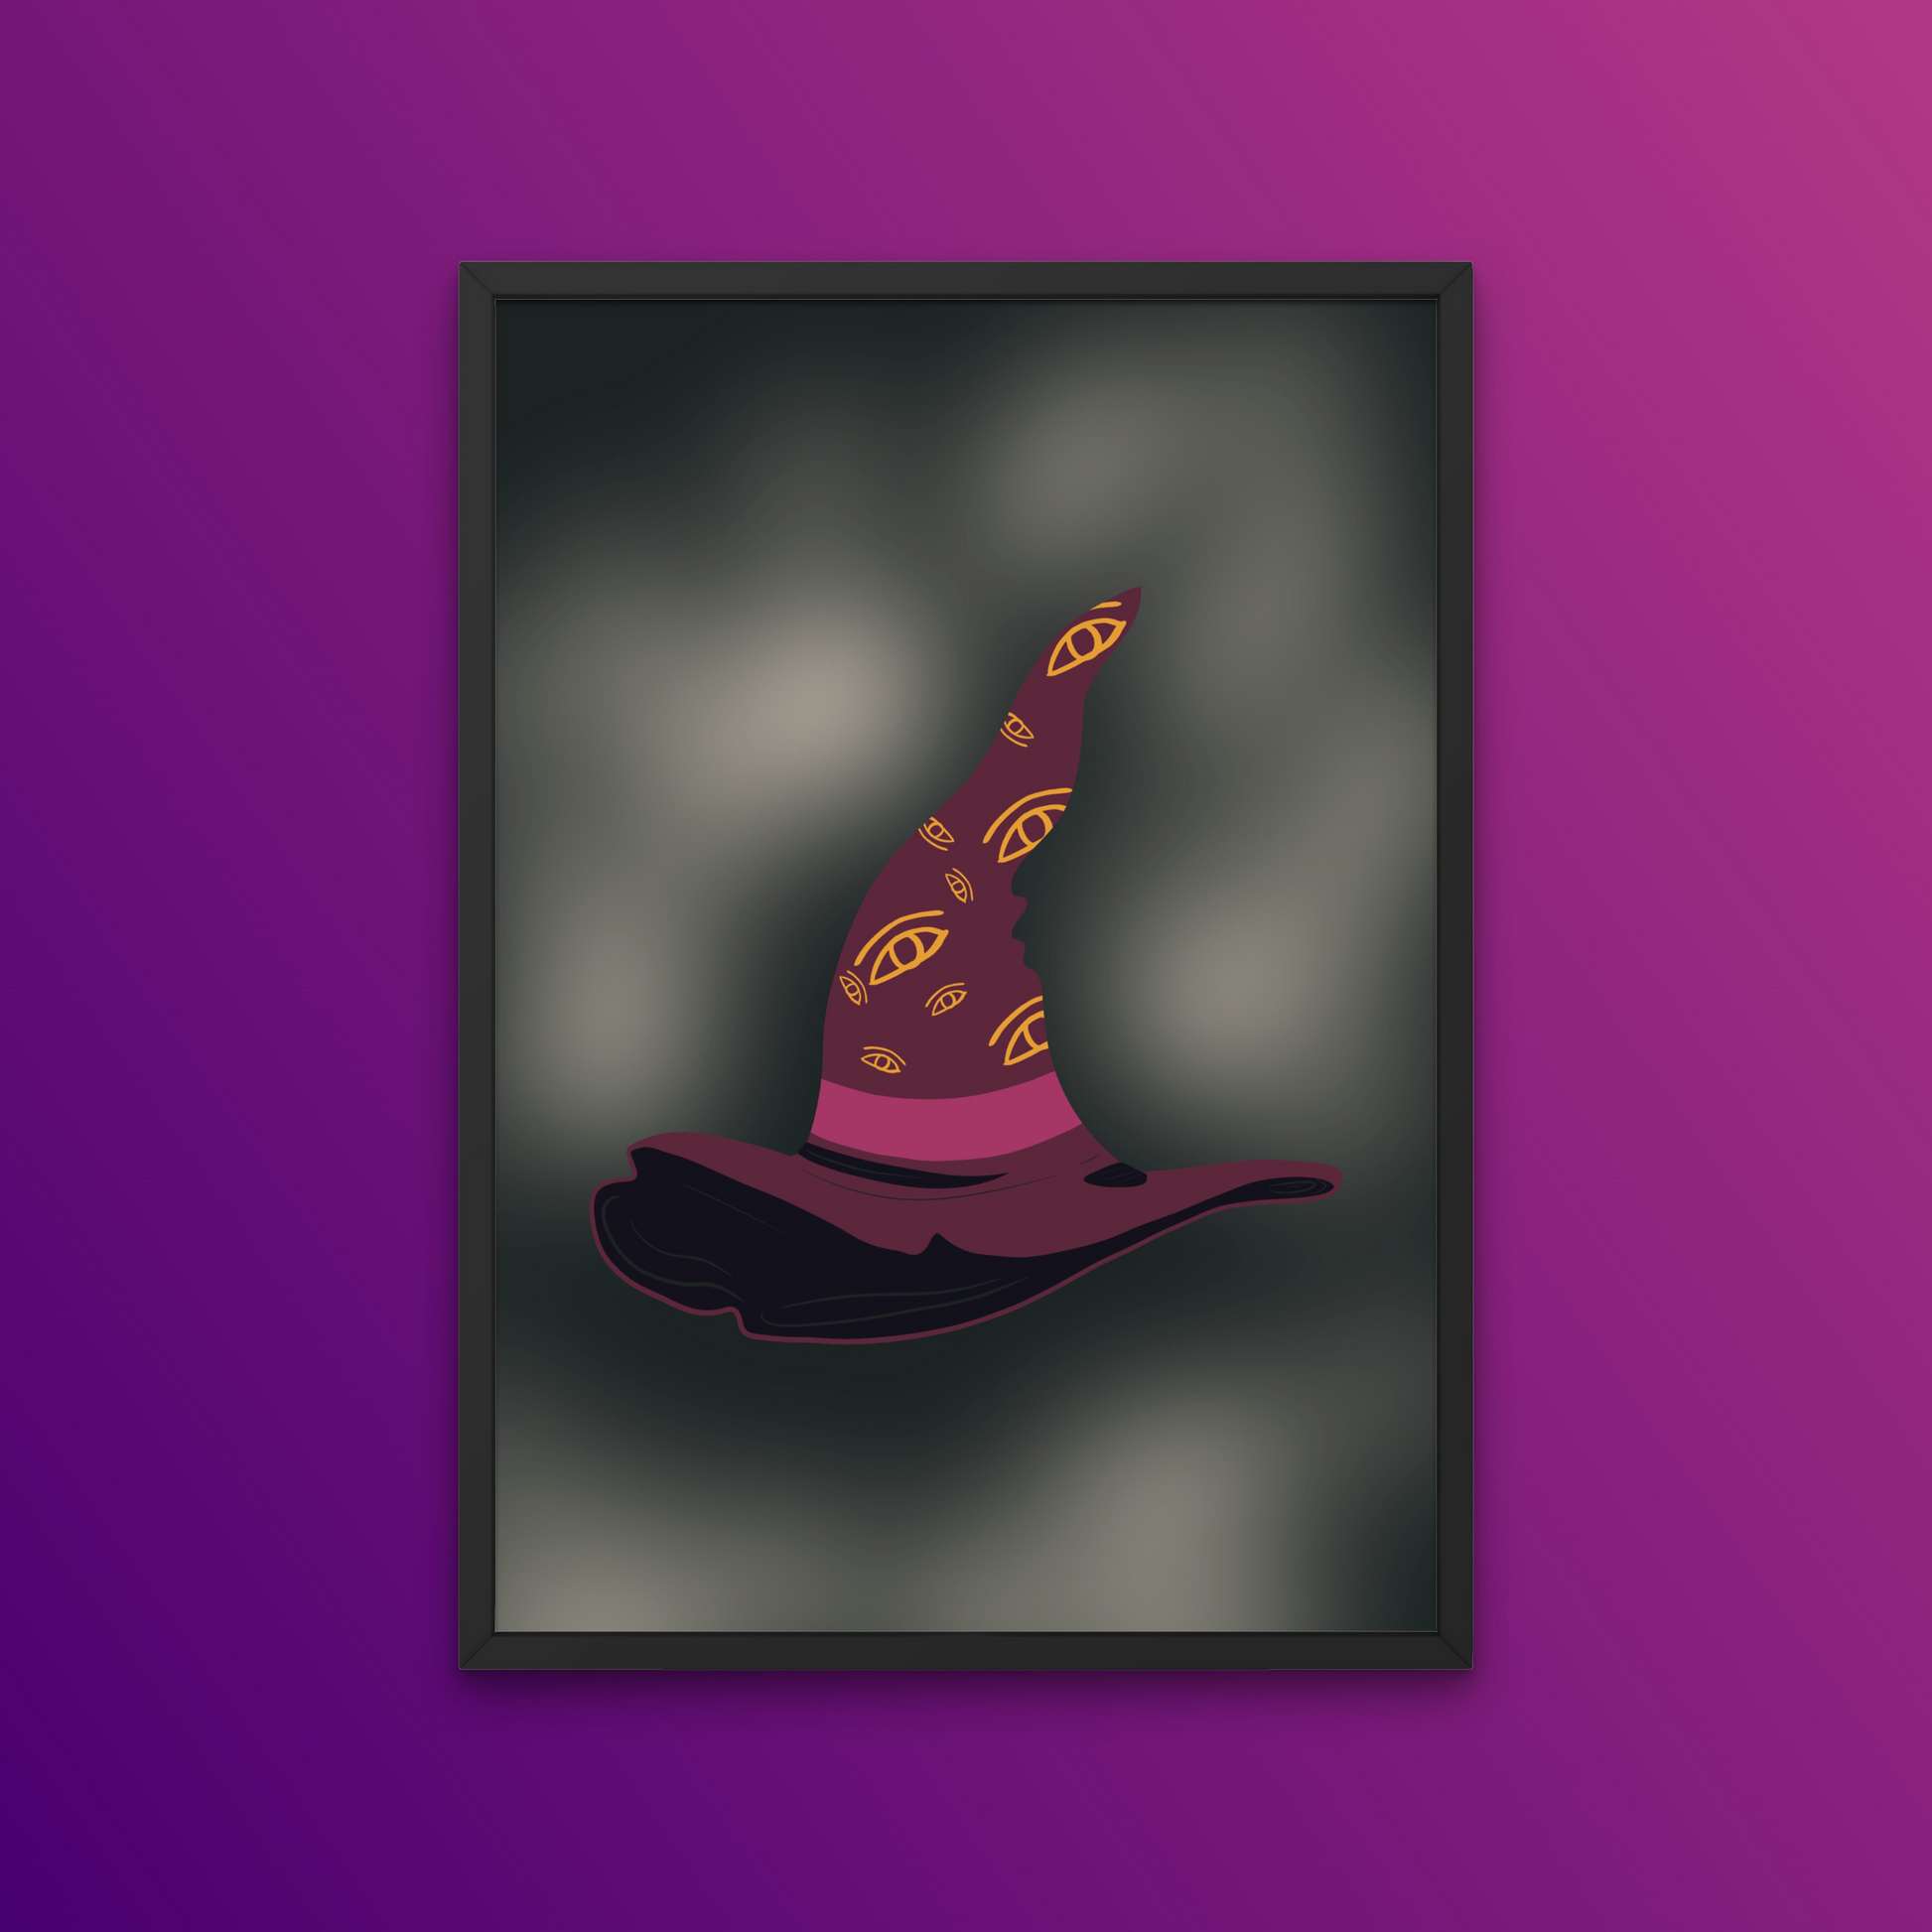 Celebrate the witching hour with this spectacular Witches Watching Hat Art Print. This eerie and eye-catching art print is perfect for setting the scene of your Halloween gathering. The intense purple, maroon, and black tones add a touch of darkness, while the witch hat itself is both spooky and intriguing. 